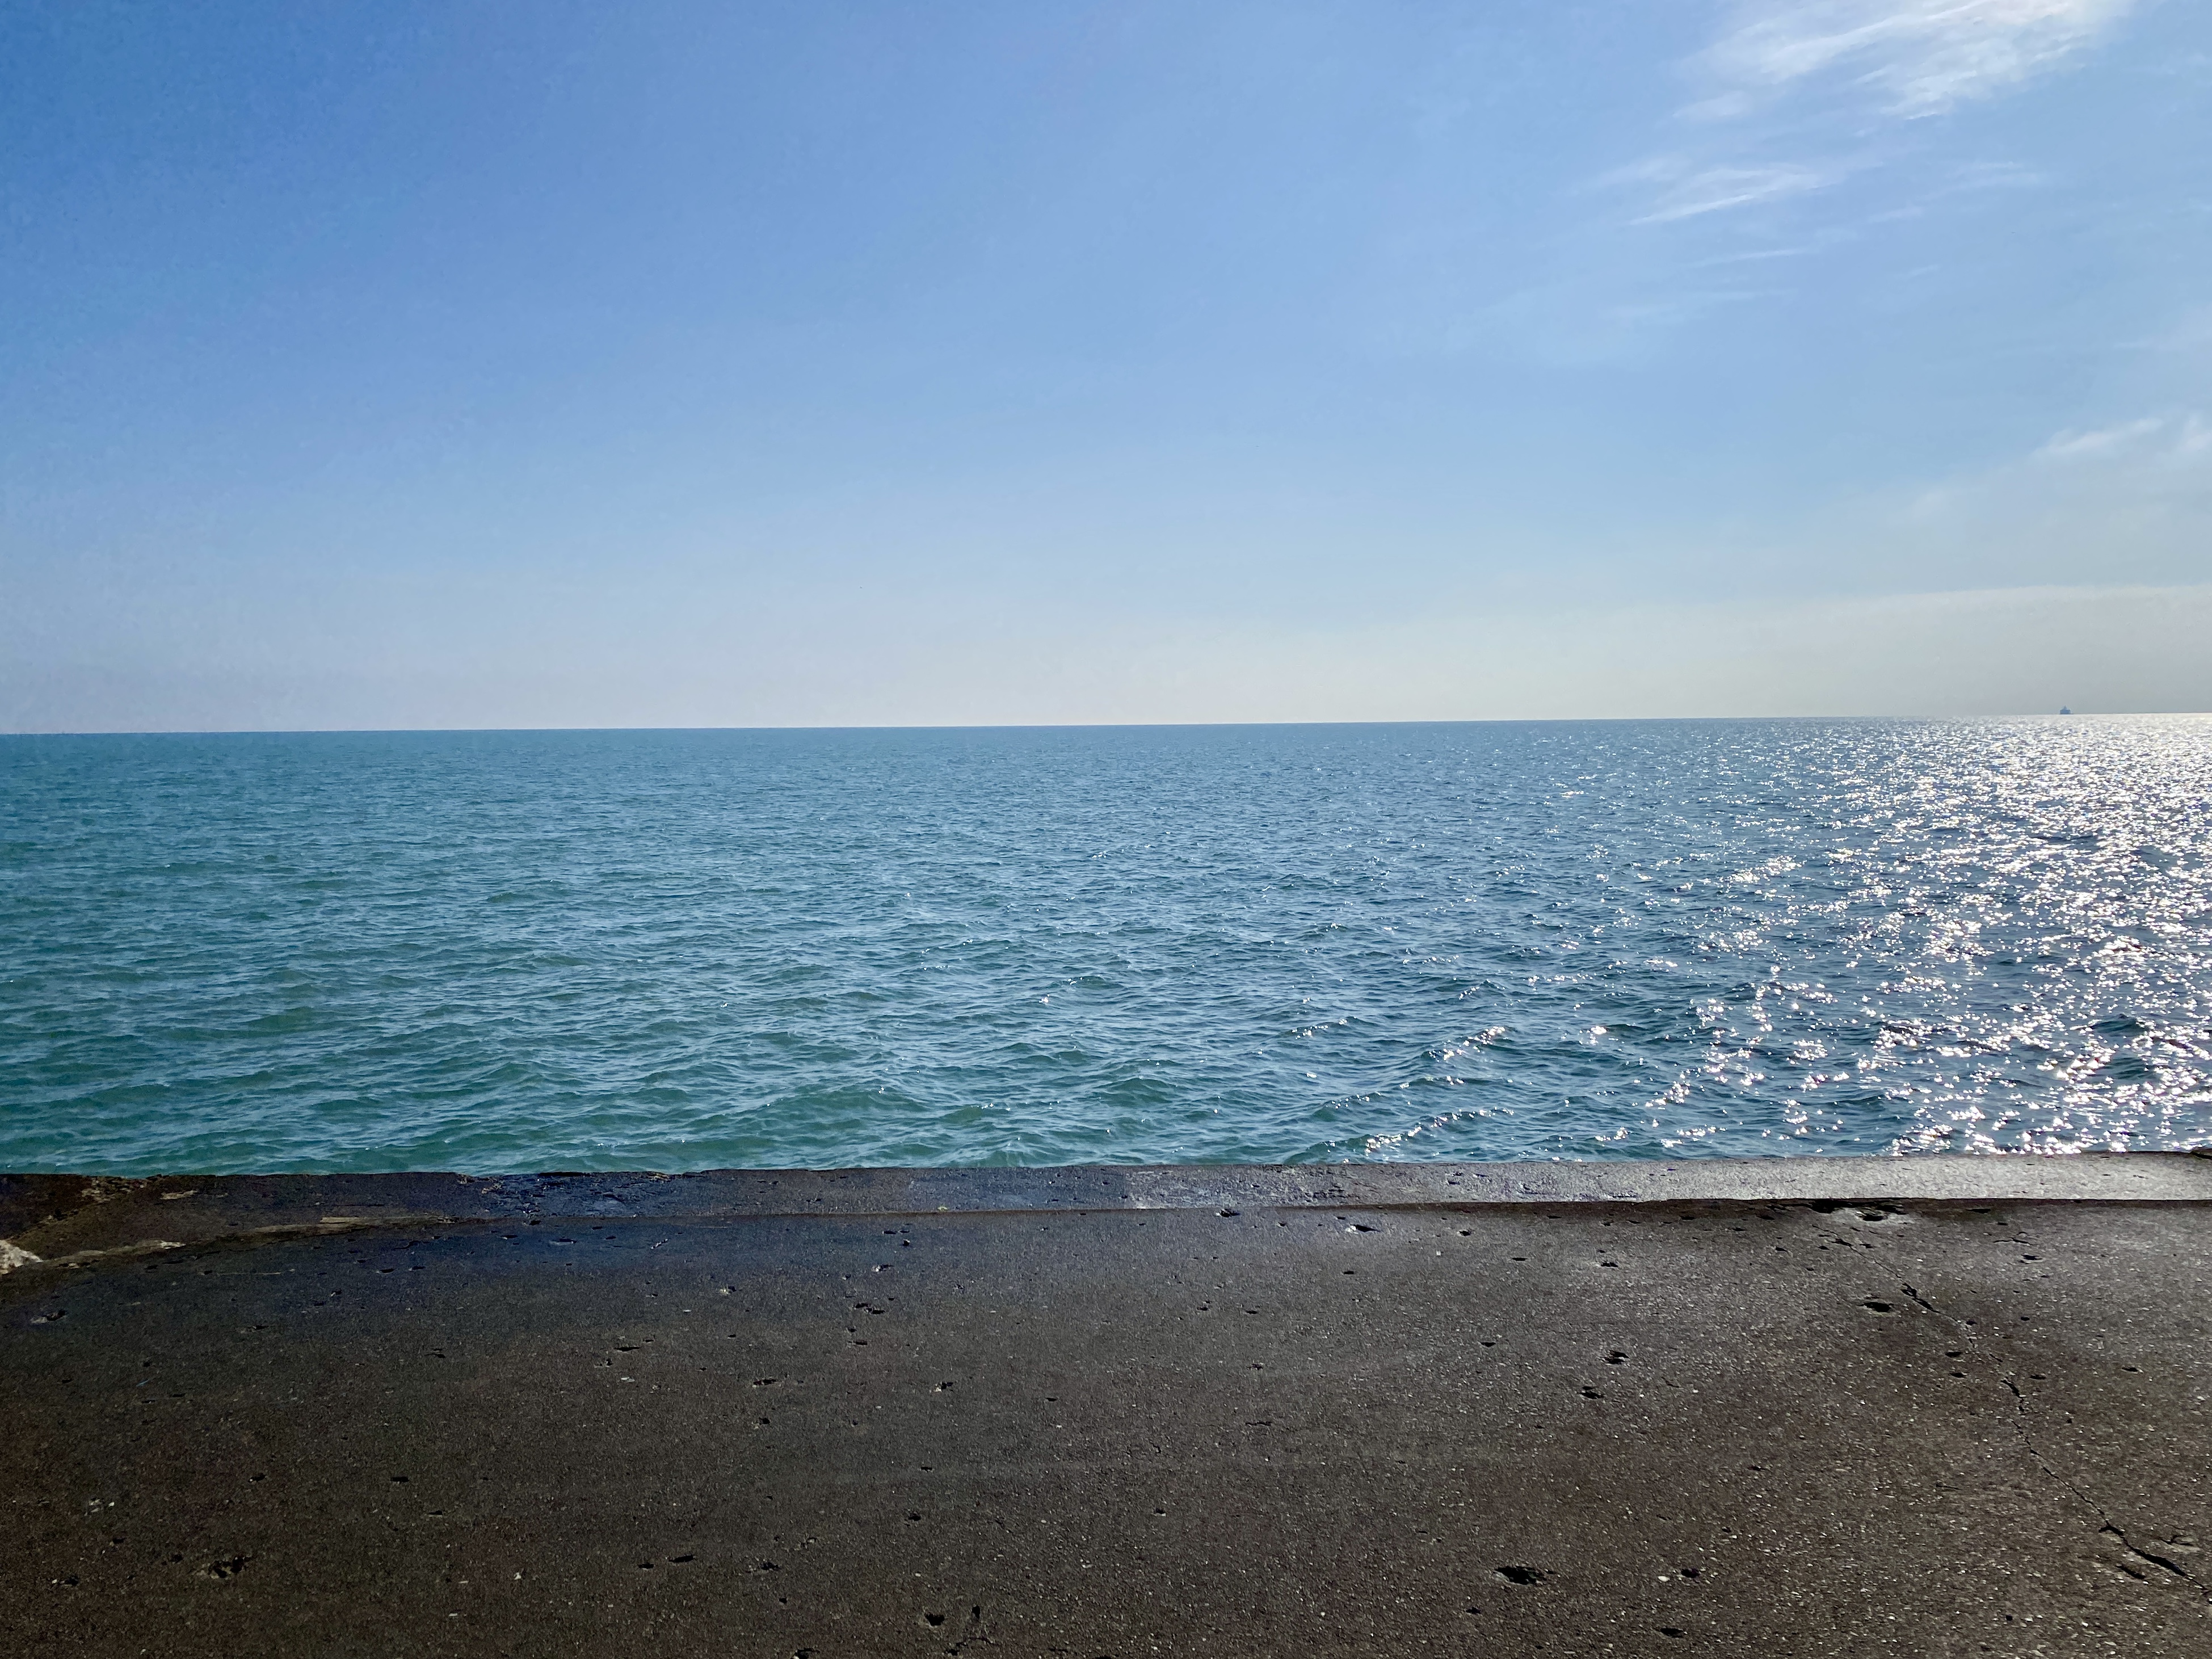 Horizon of large Lake Michigan with a hazy blue sky overhead and a concrete shelf in the foreground